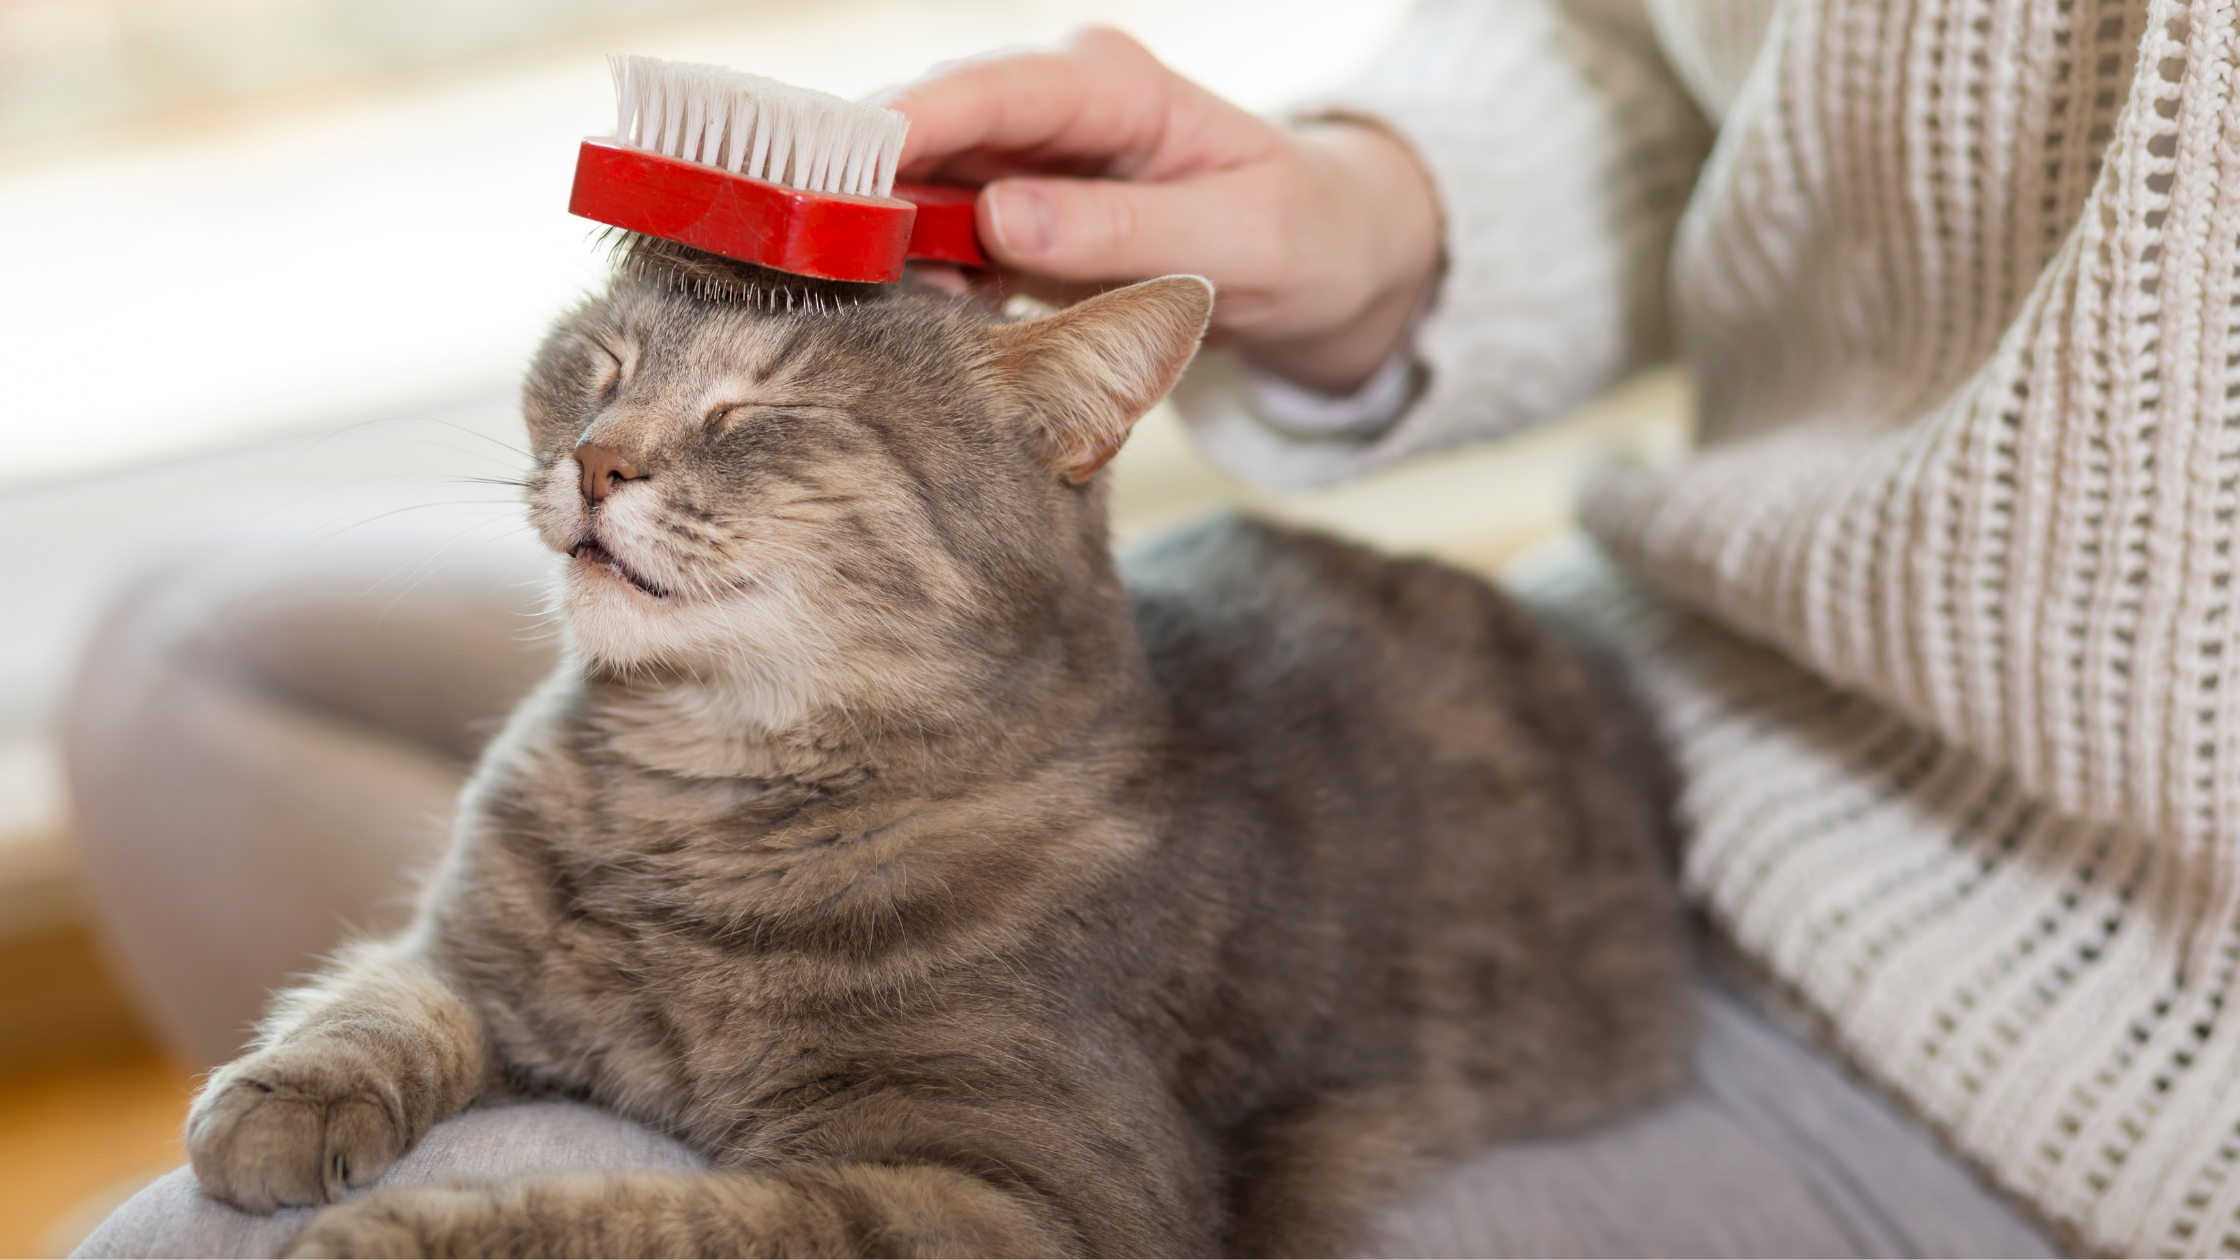 Woman brushing a tabby cat using a red comb